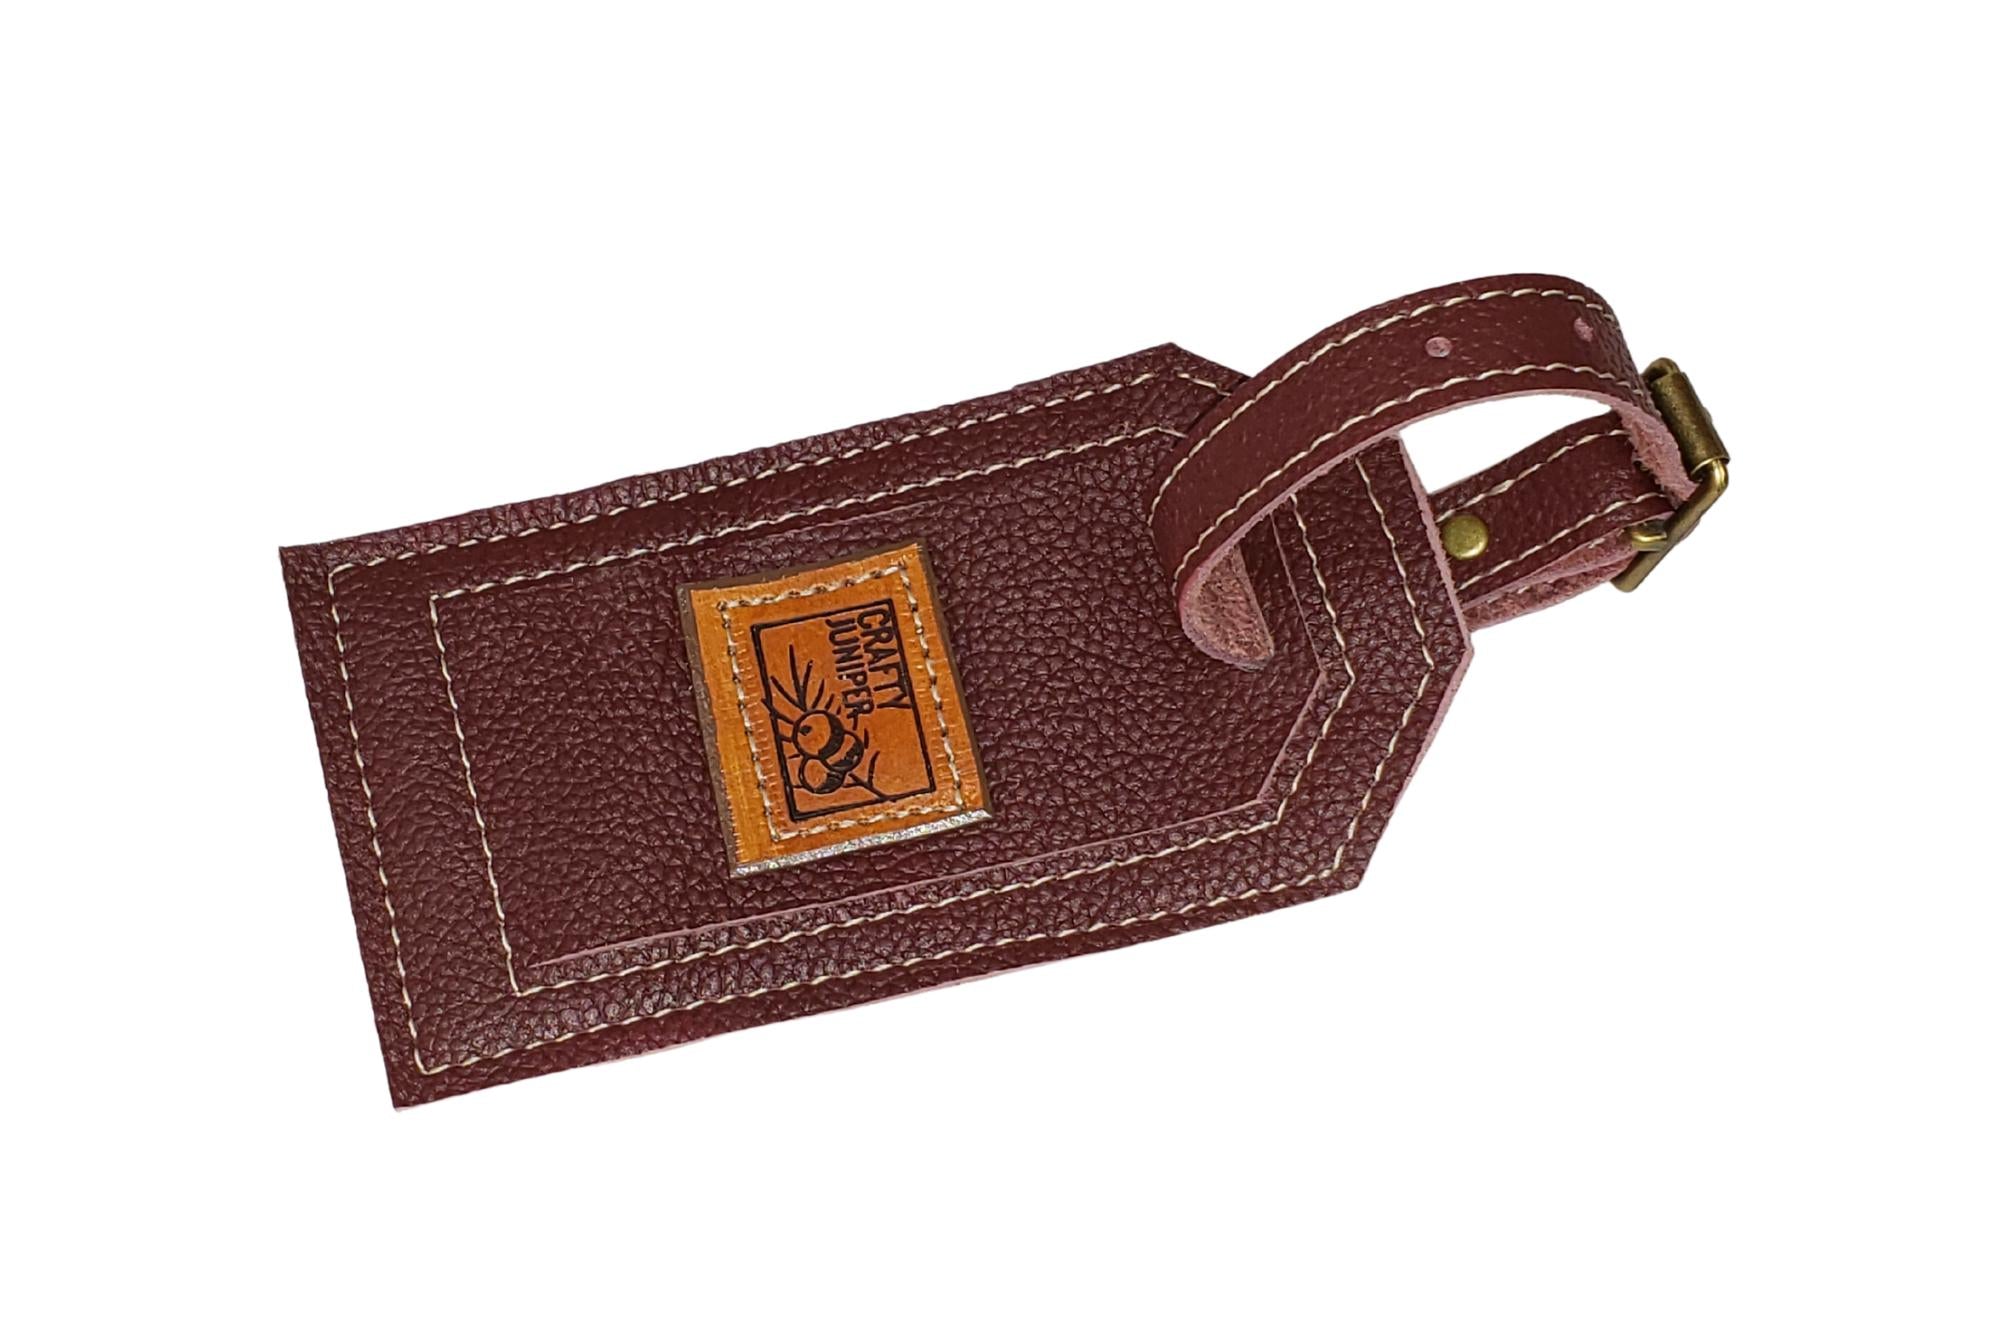 Leather Luggage Tags – Aunt Laurie's